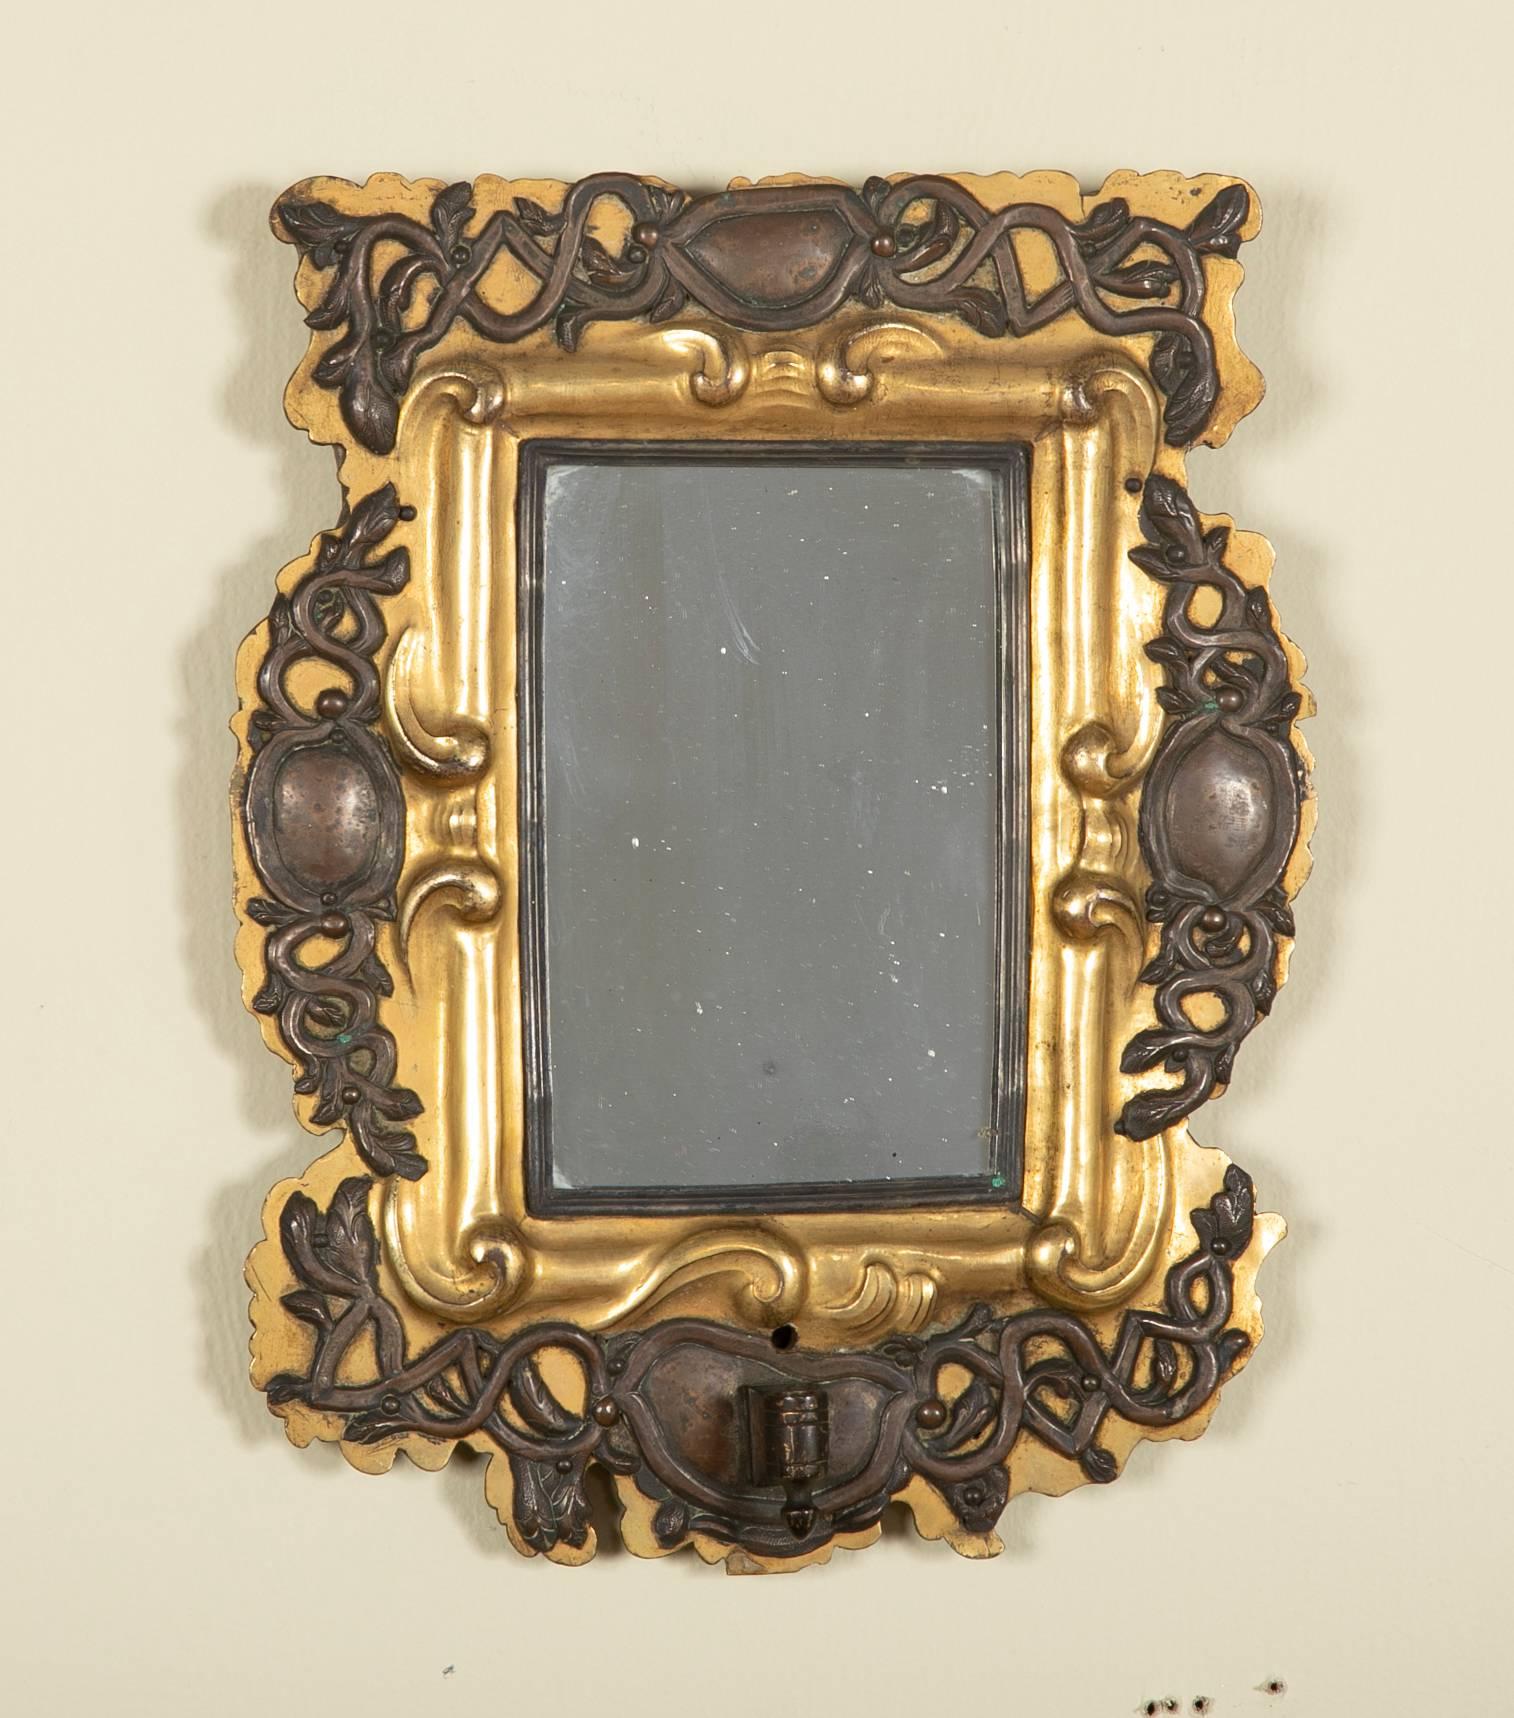 Pair of unusual Baroque Baltic or possibly Russian mirrors that were originally sconces. With silver arabesques overlaying gilt brass frames mounted on oak. The holders for candle arms still mounted on what are now a wonderfully unique pair of small